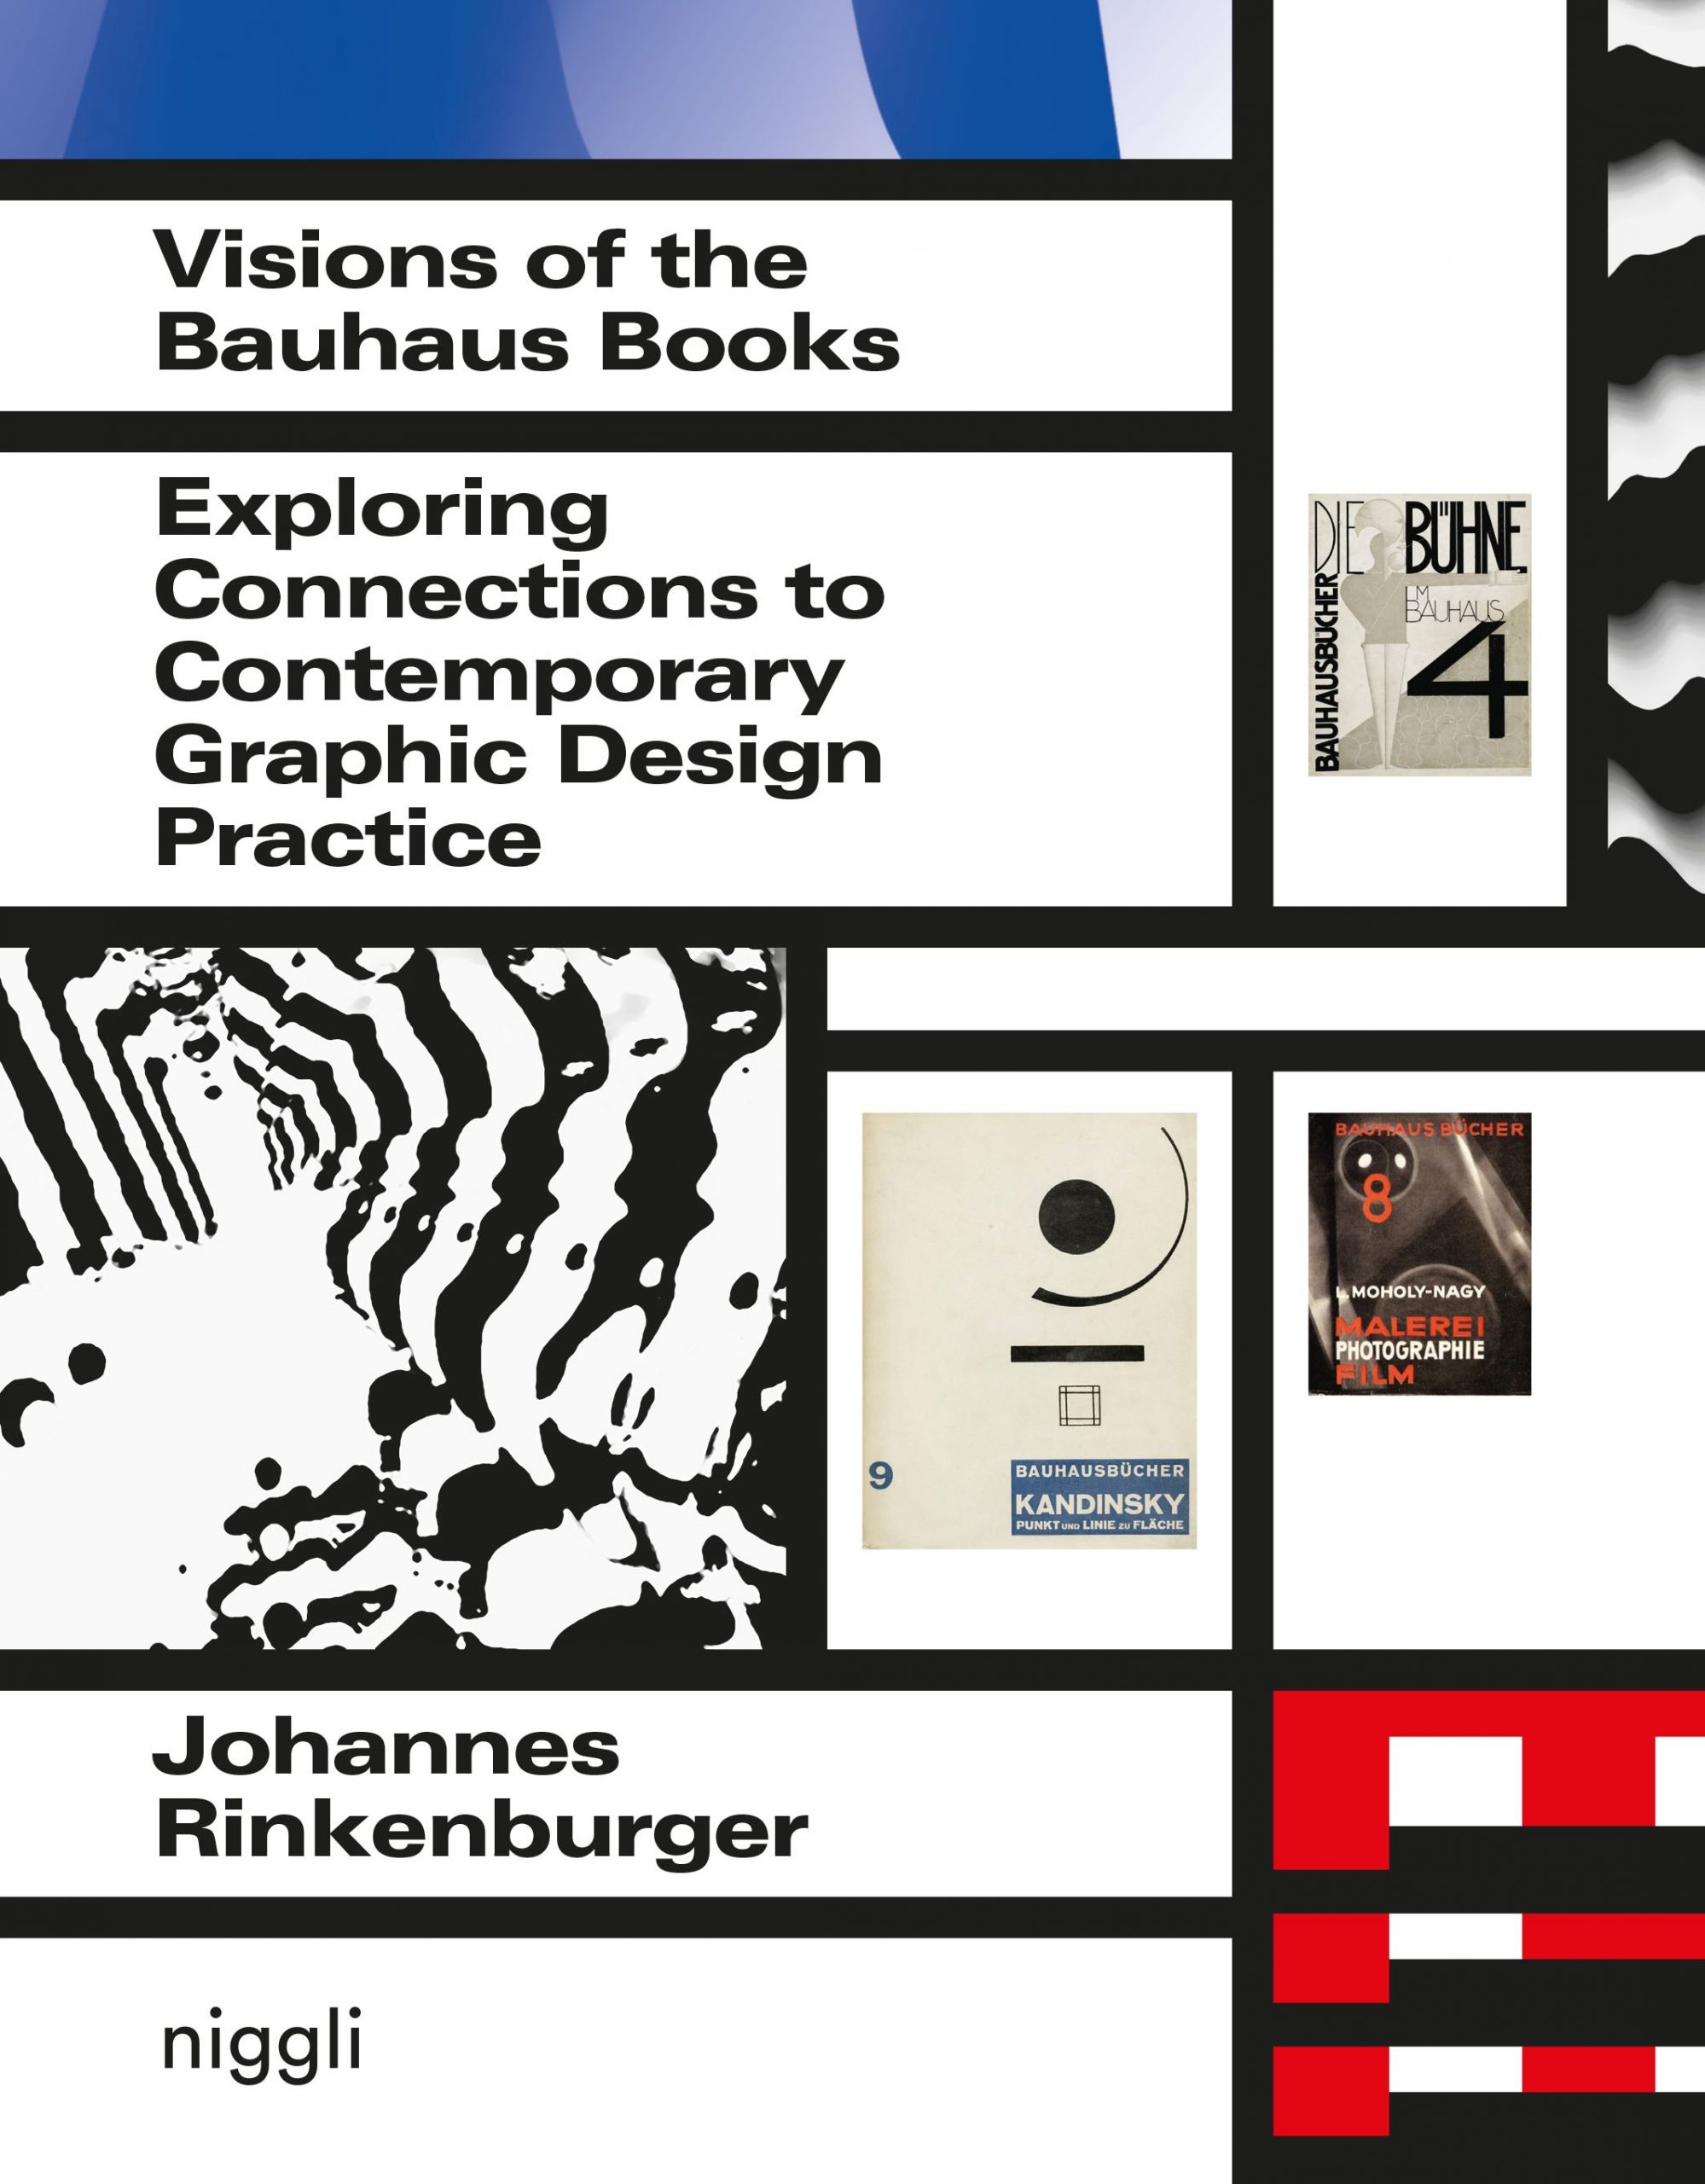 Visions of the Bauhaus Books. Exploring Connections to Contemporary Graphic Design Practice